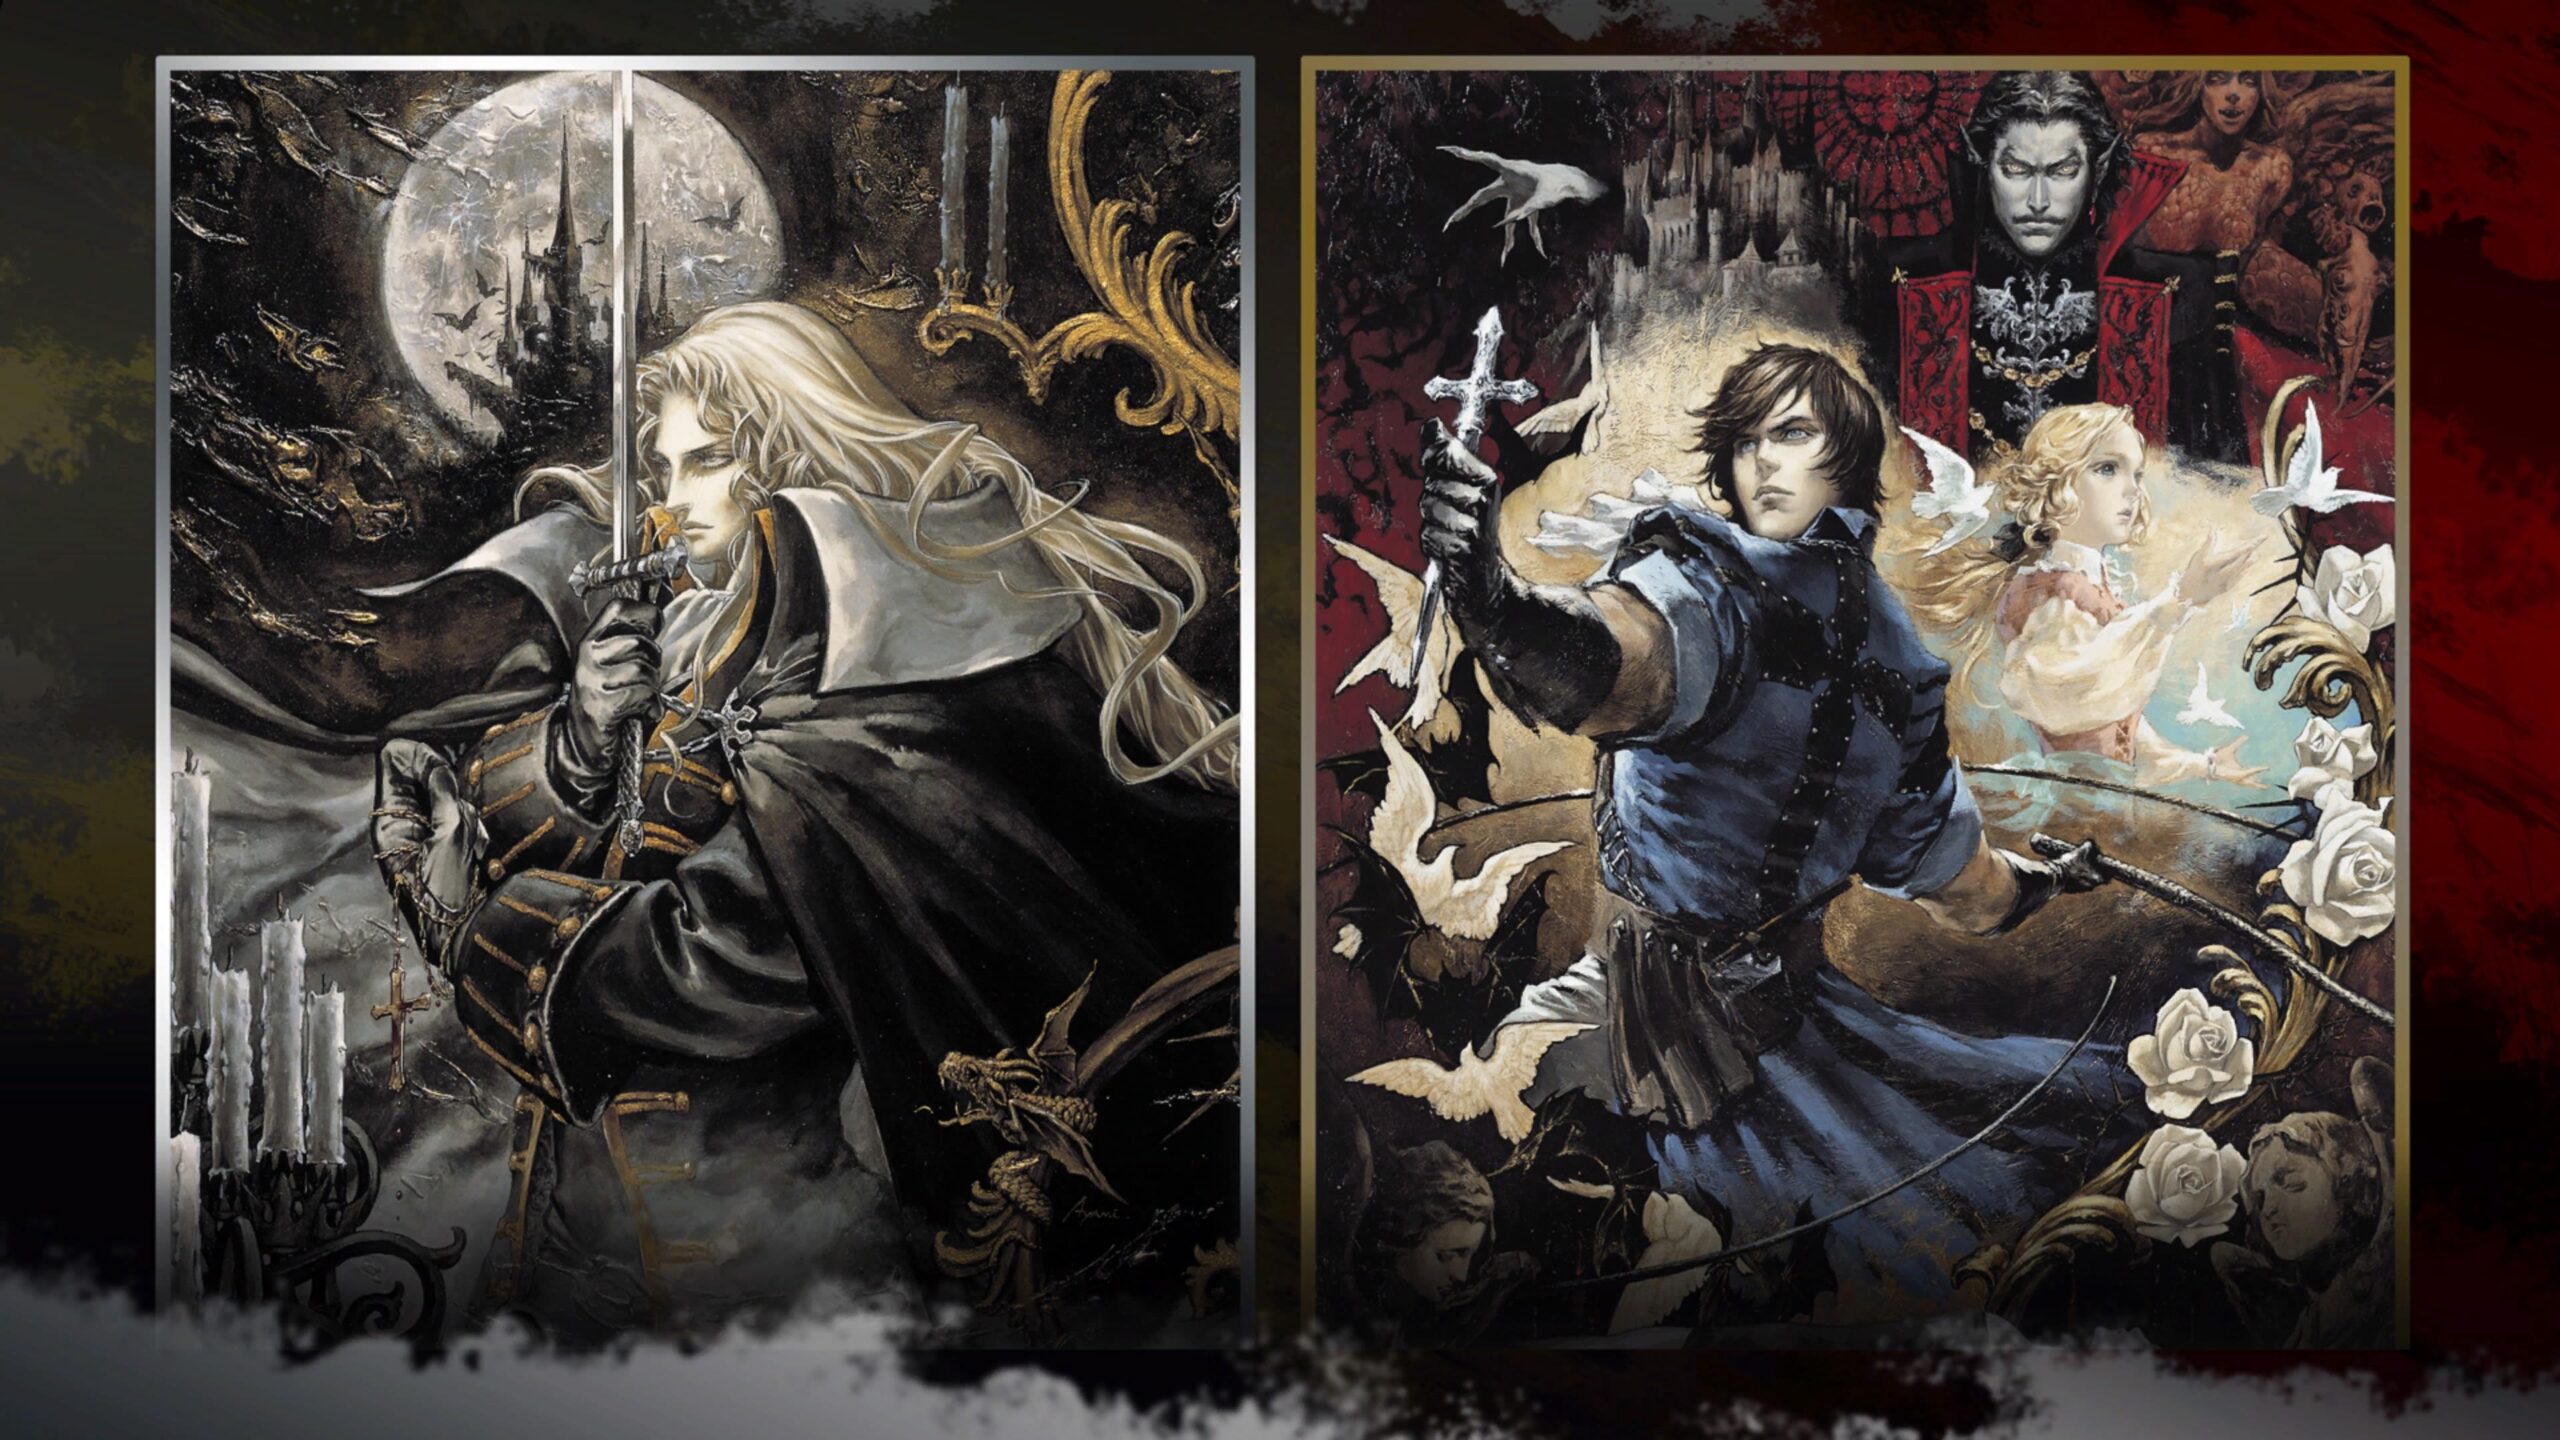 Castlevania Symphony Of The Night Wallpapers, Castlevania Symphony Of The Night, Game